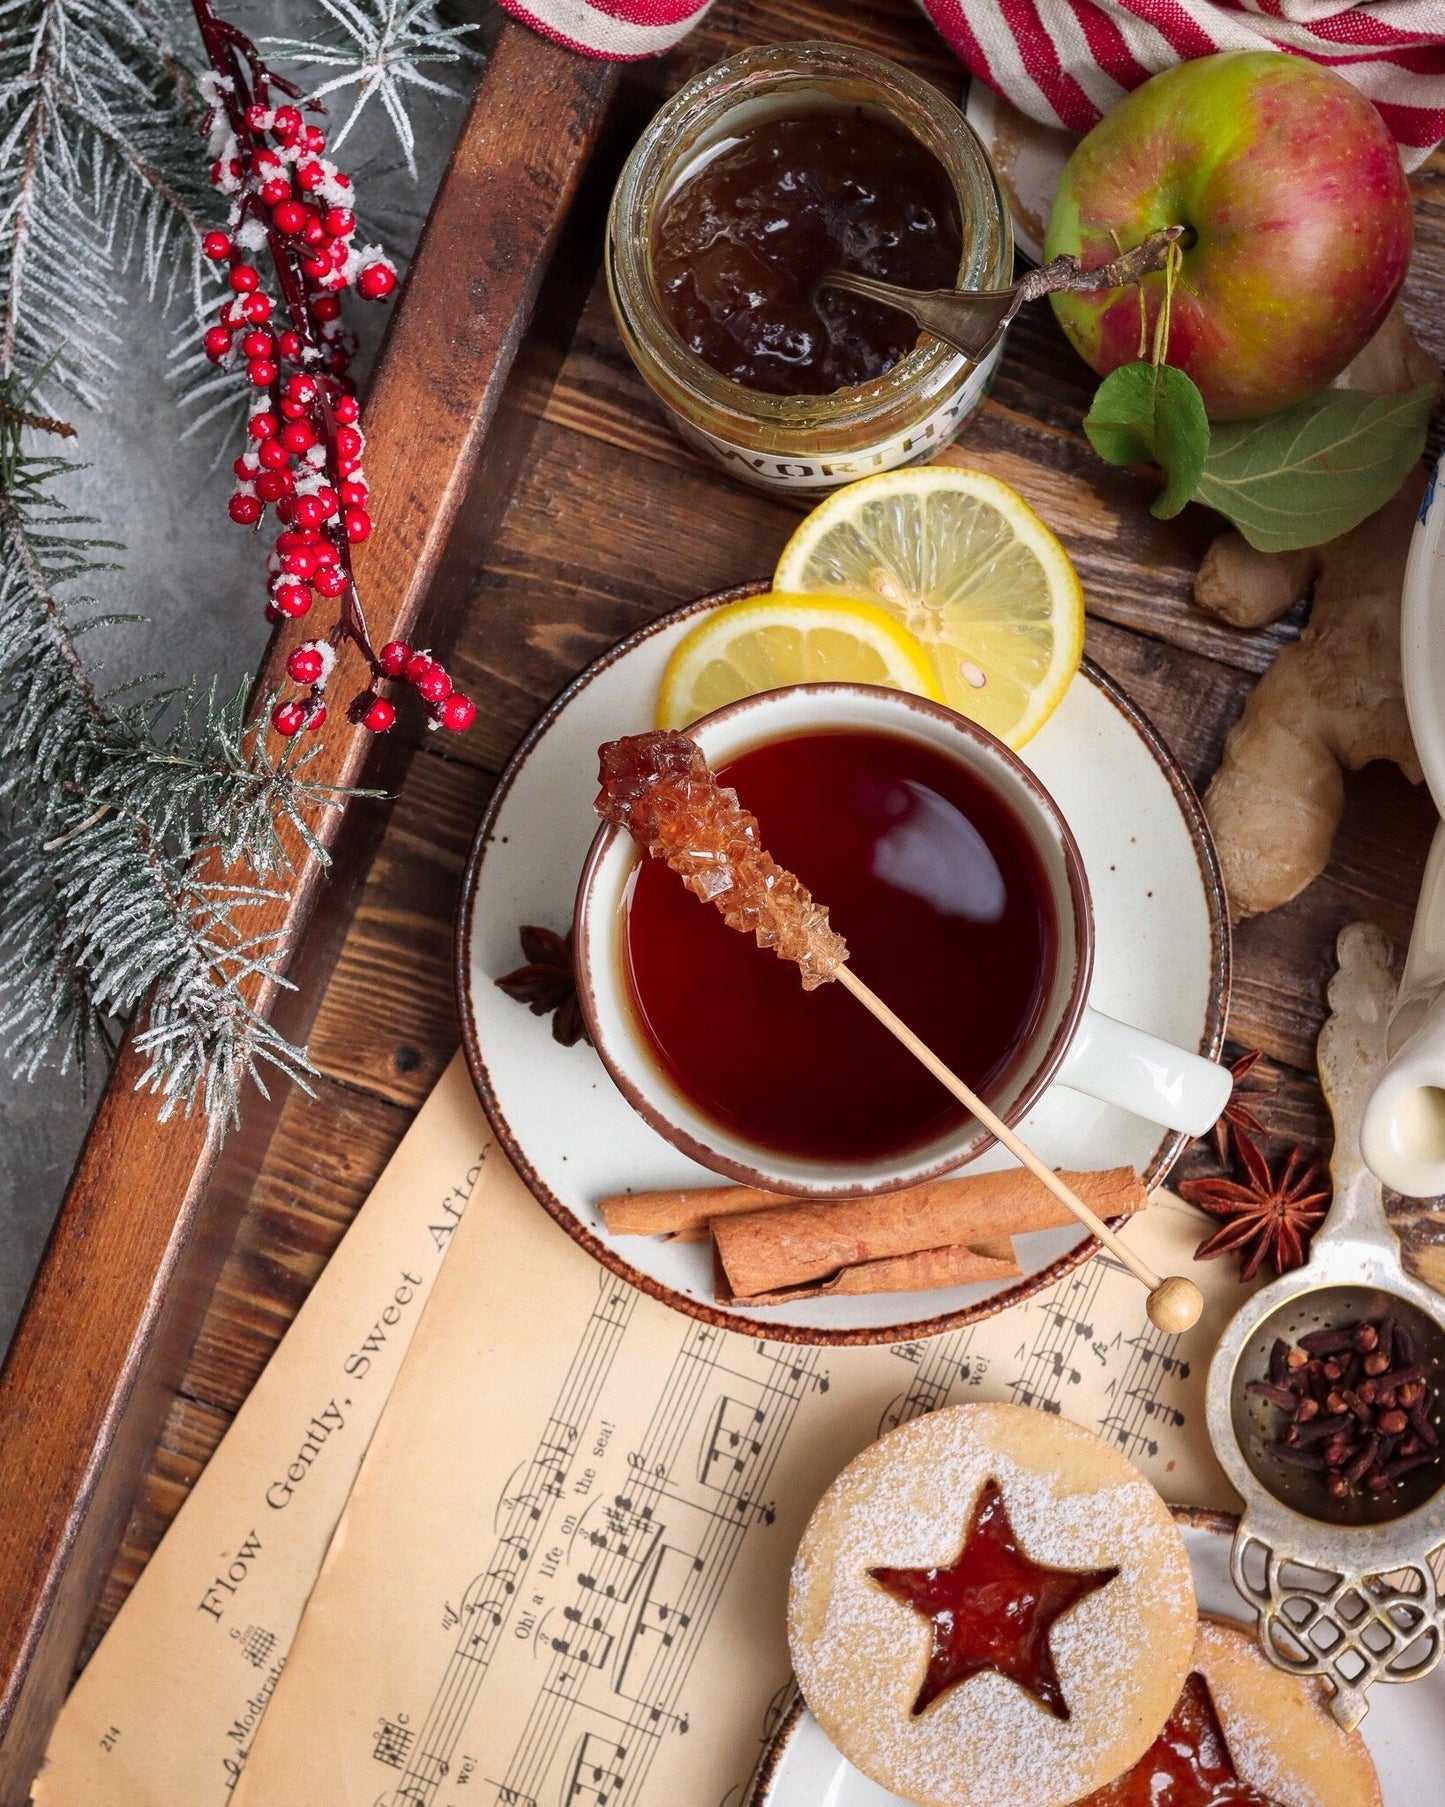 Warm cup of earl grey tea infused with Worthy's Gingersnap Apple Spread in a Christmas setting.